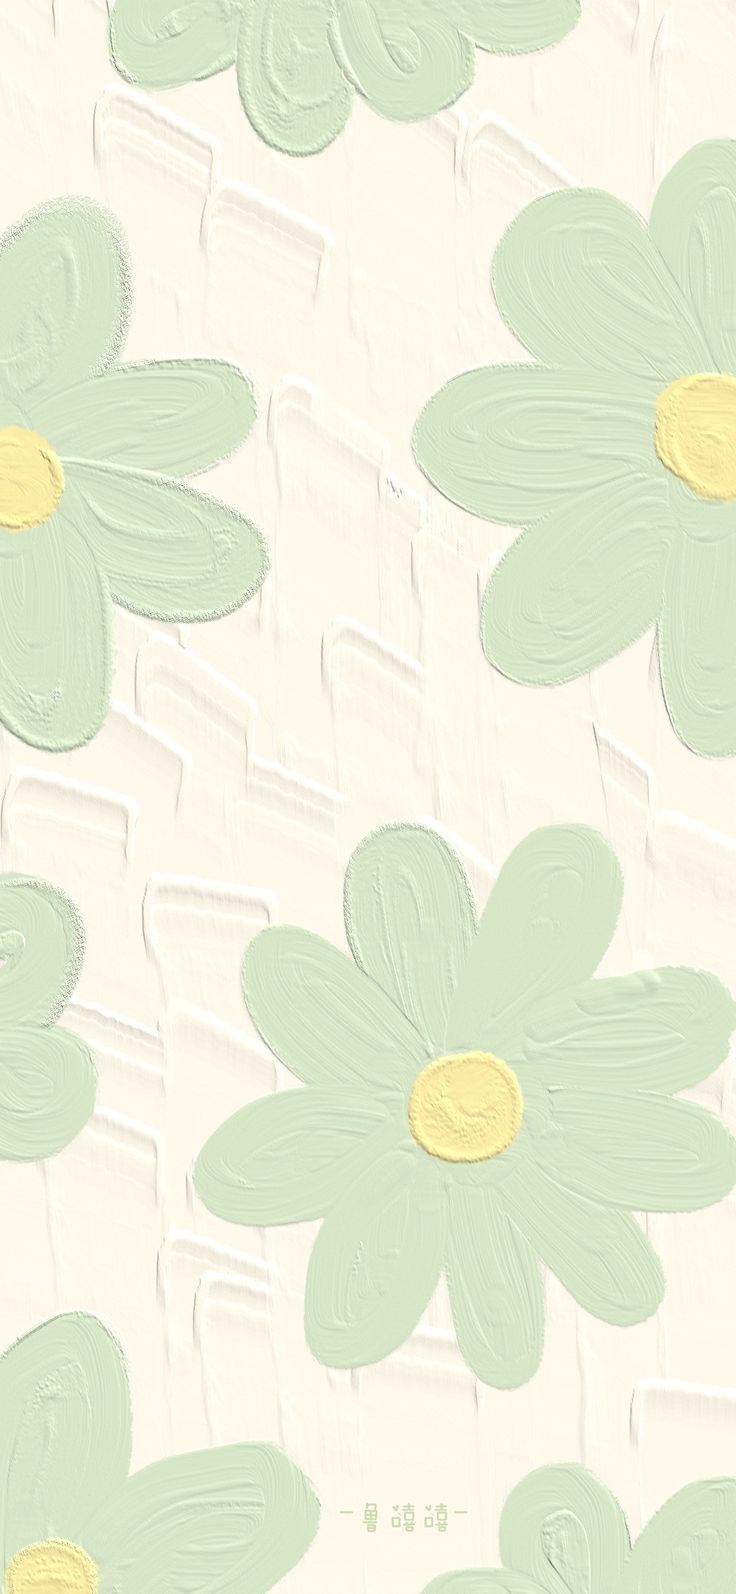 Pin by MWEII on  Mint green wallpaper iphone, Phone wallpaper patterns, Iphone wallpaper green